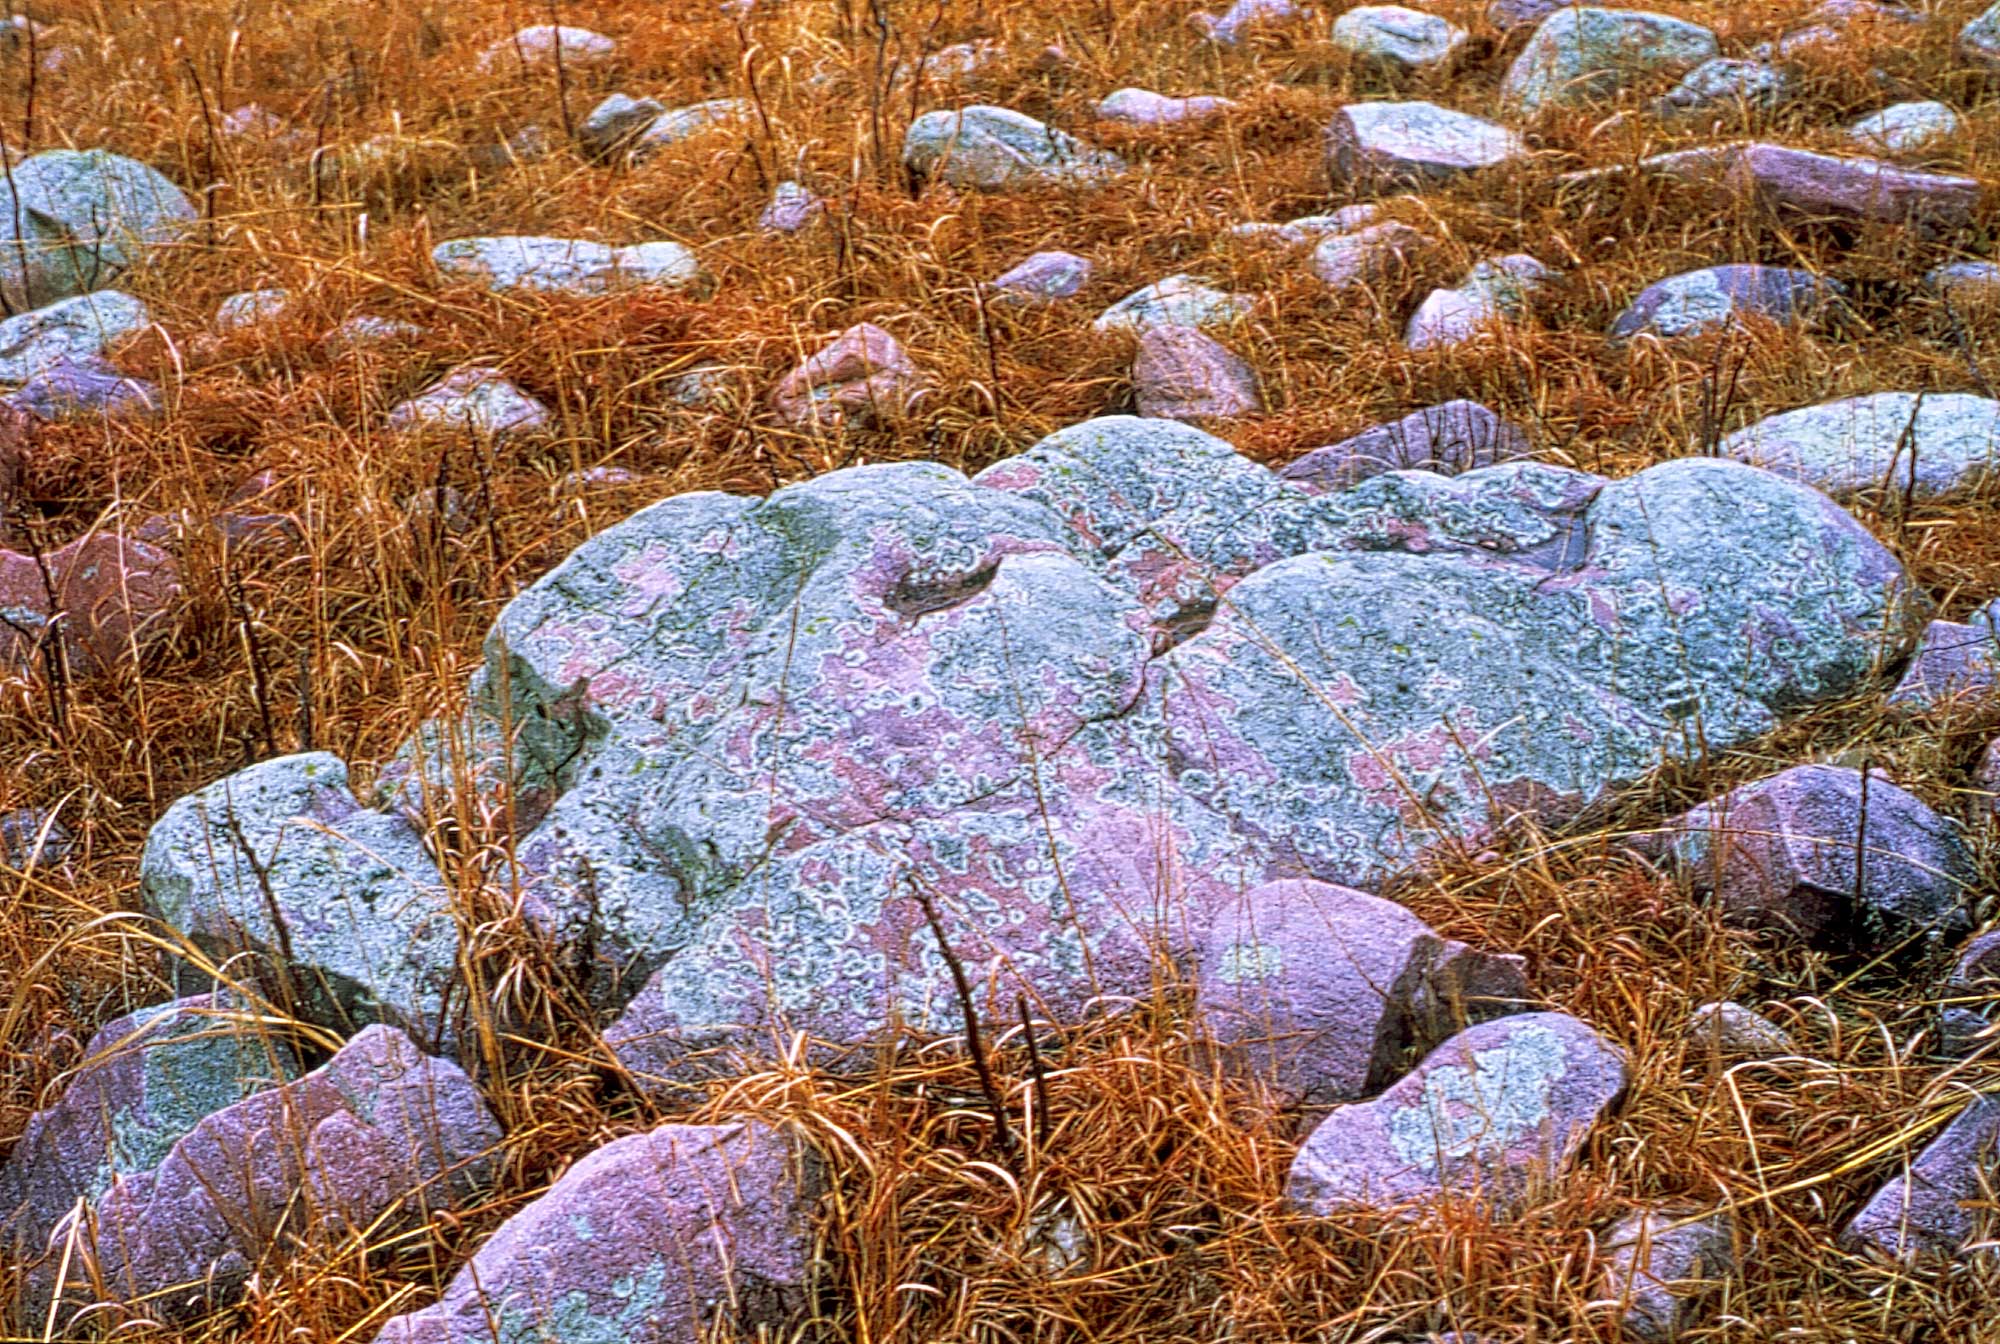 Photograph of glacial erratics (boulders) of Sioux quartzite in a field. The boulders are pink and gray in color.